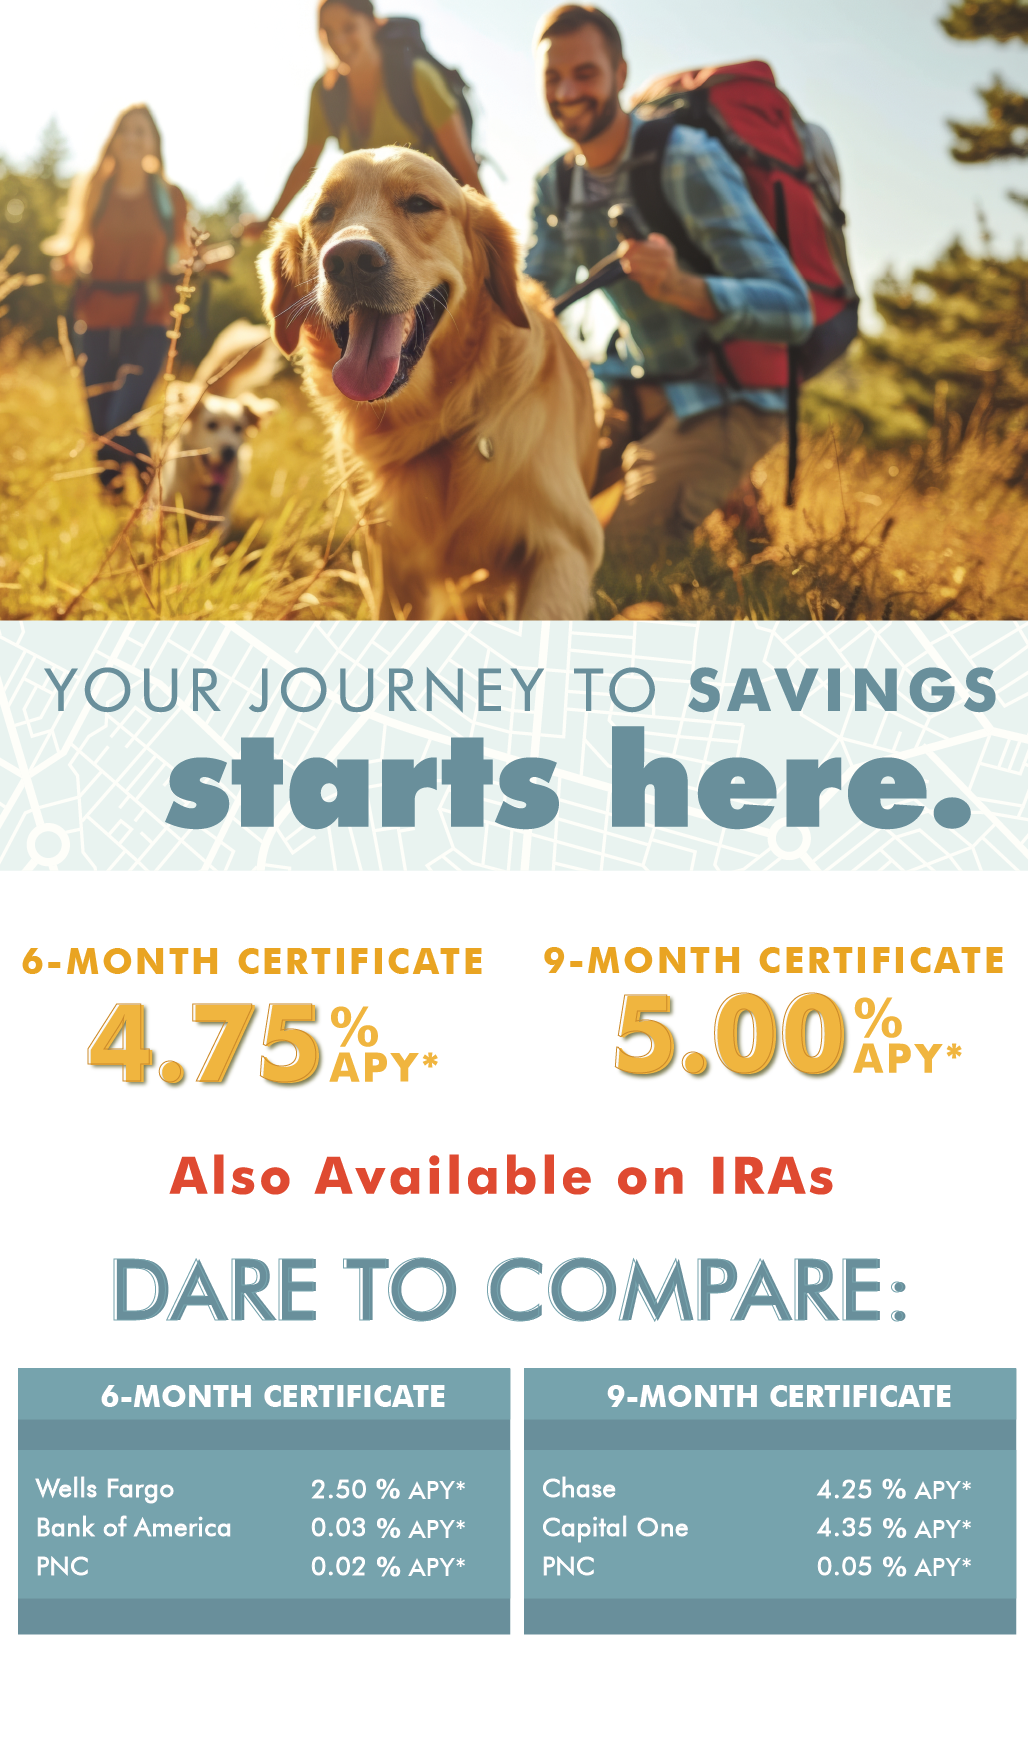 your journey to savings starts here